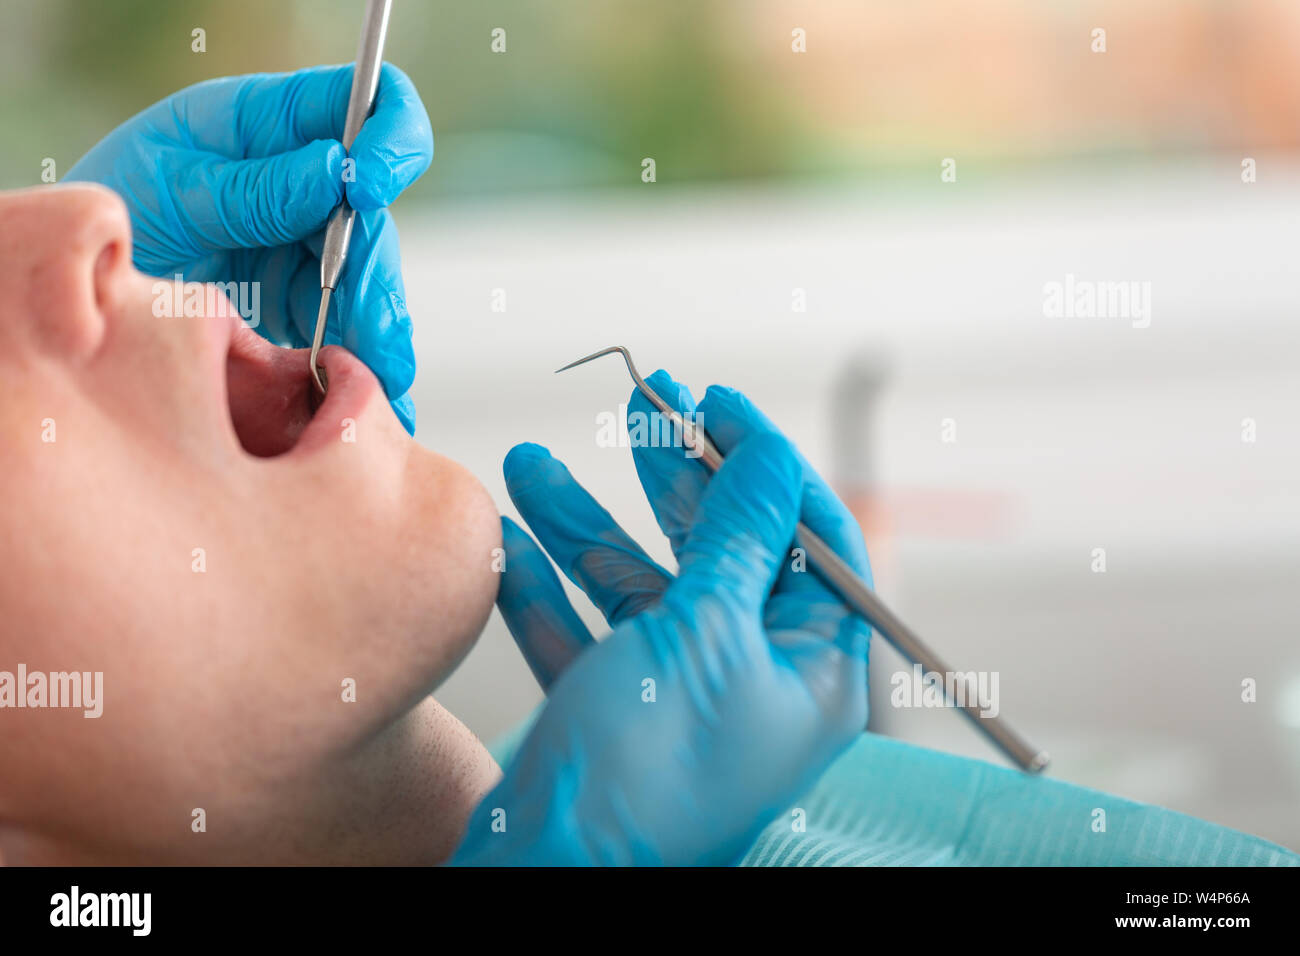 A female dentist examines the oral cavity of the patient with a tool with a mirror. Close-up portrait of a patient with a mouth open, a doctor in Stock Photo